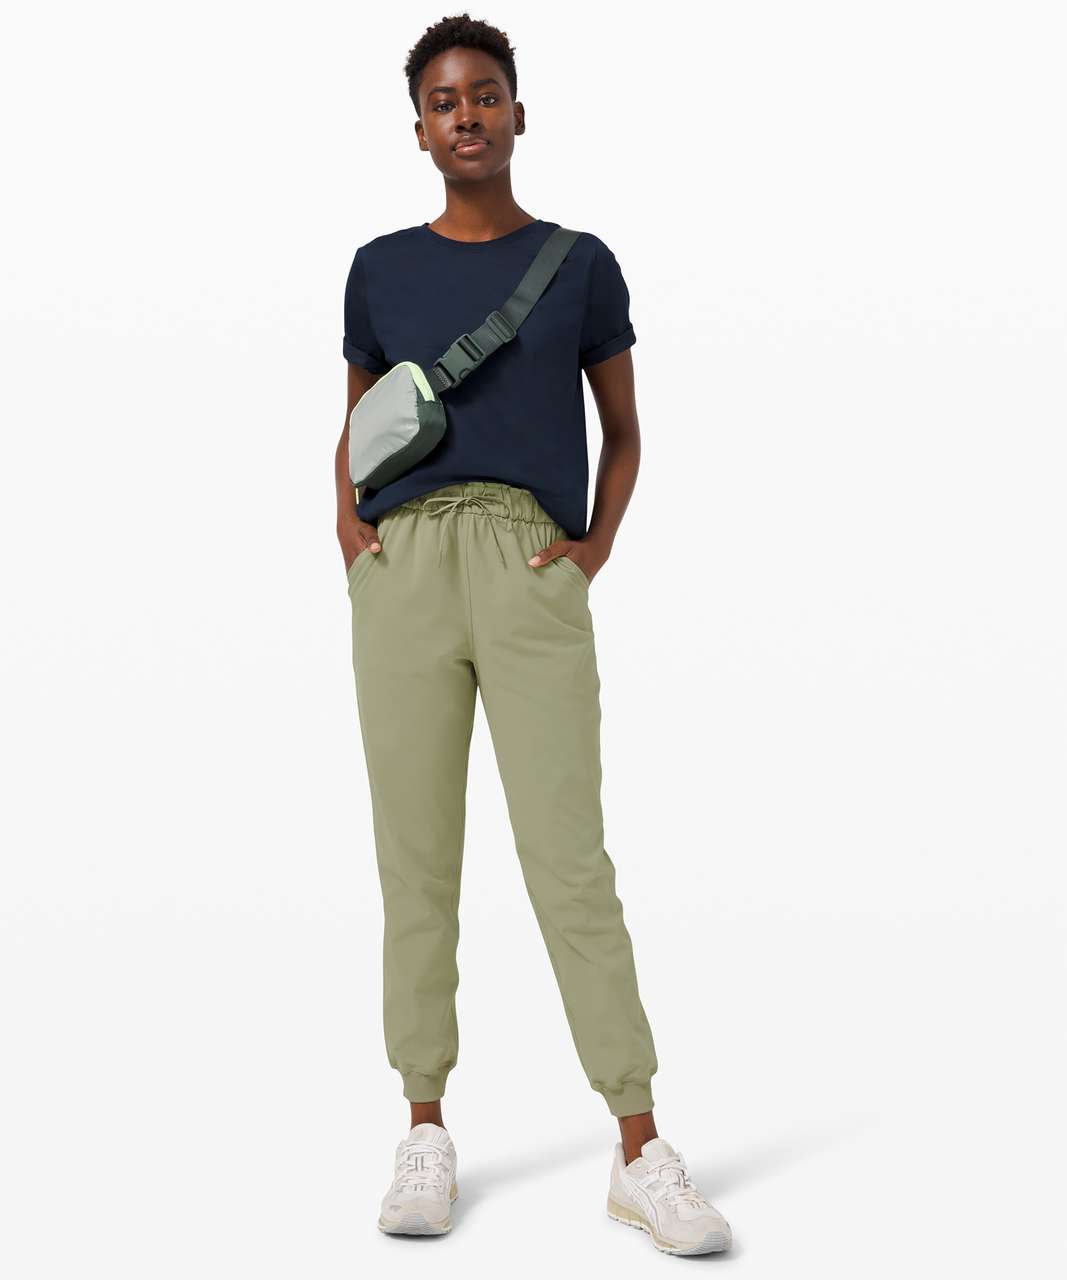 Lululemon Joggers Green Size 4 - $75 (36% Off Retail) - From Elise